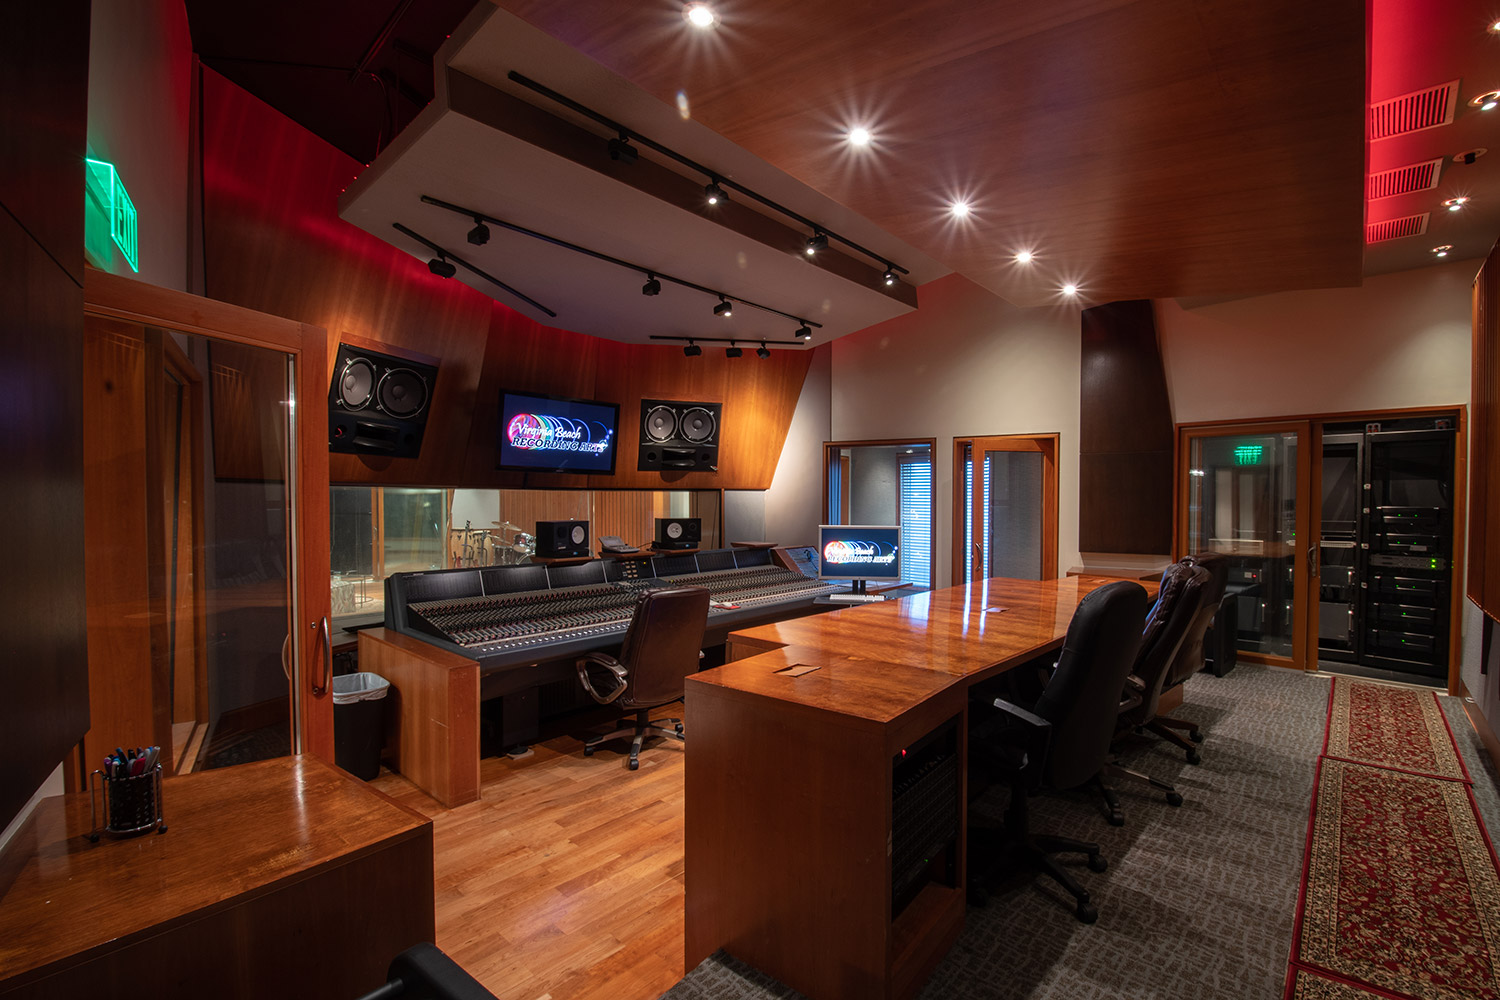 Former Thomas Crown Studio owned by Timbaland, Virginia Beach Recording Studio is a is a spacious 6,756 square ft. two-story ‘destination studio’ owned by Josh Haddad and designed by WSDG. One of the best recording studios in the world, where artist such as Pharrell, Kanye West, Beyonce and Justin Timberlake record. Control Room A.